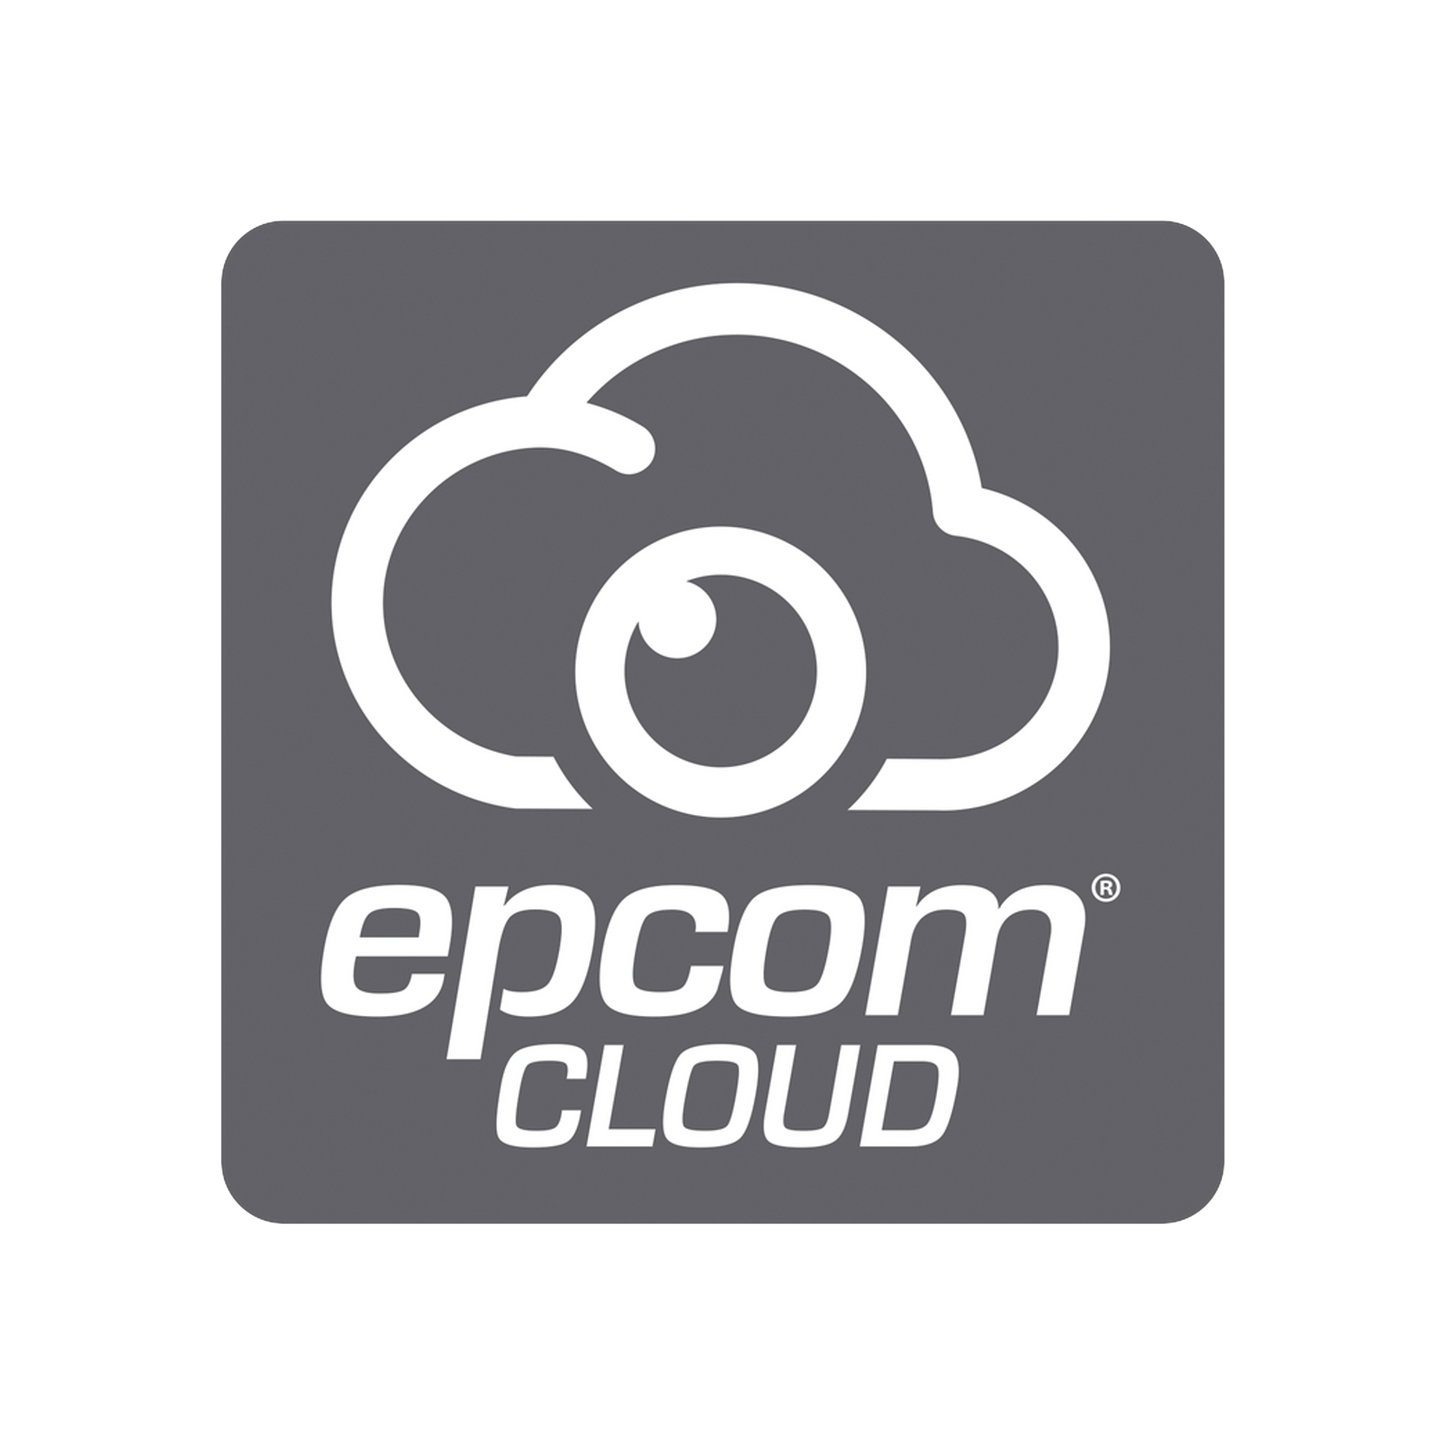 Epcom Cloud Annual Subscription / Cloud recording for 1 video channel at 8MP with 365 days retention / Continuous recording